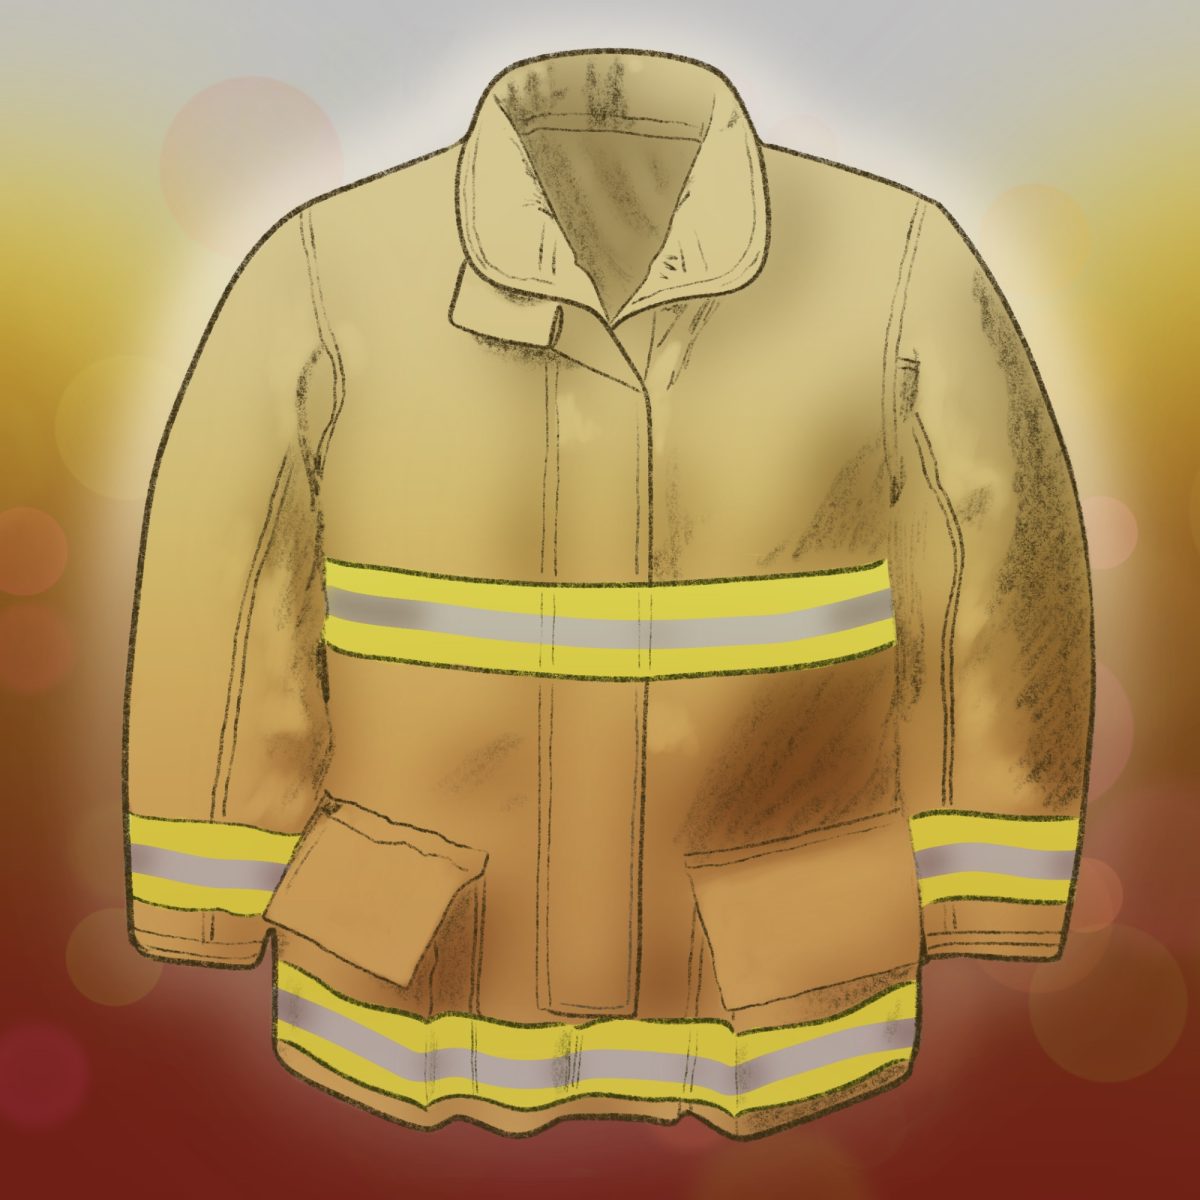 Master’s student hoping to produce firefighter jacket in Hawaii